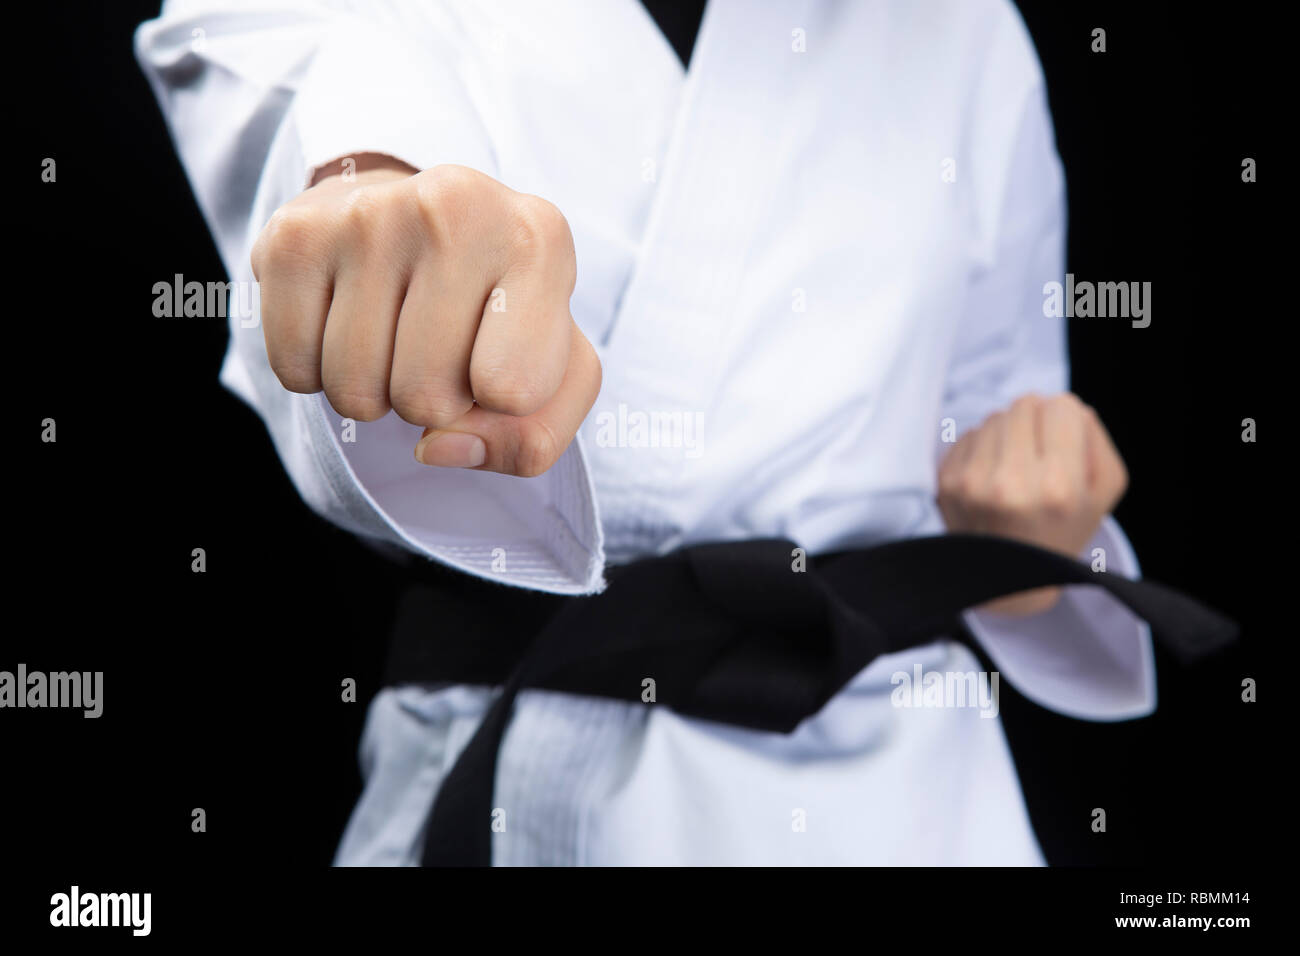 Fist of woman in karate suit on black background Stock Photo